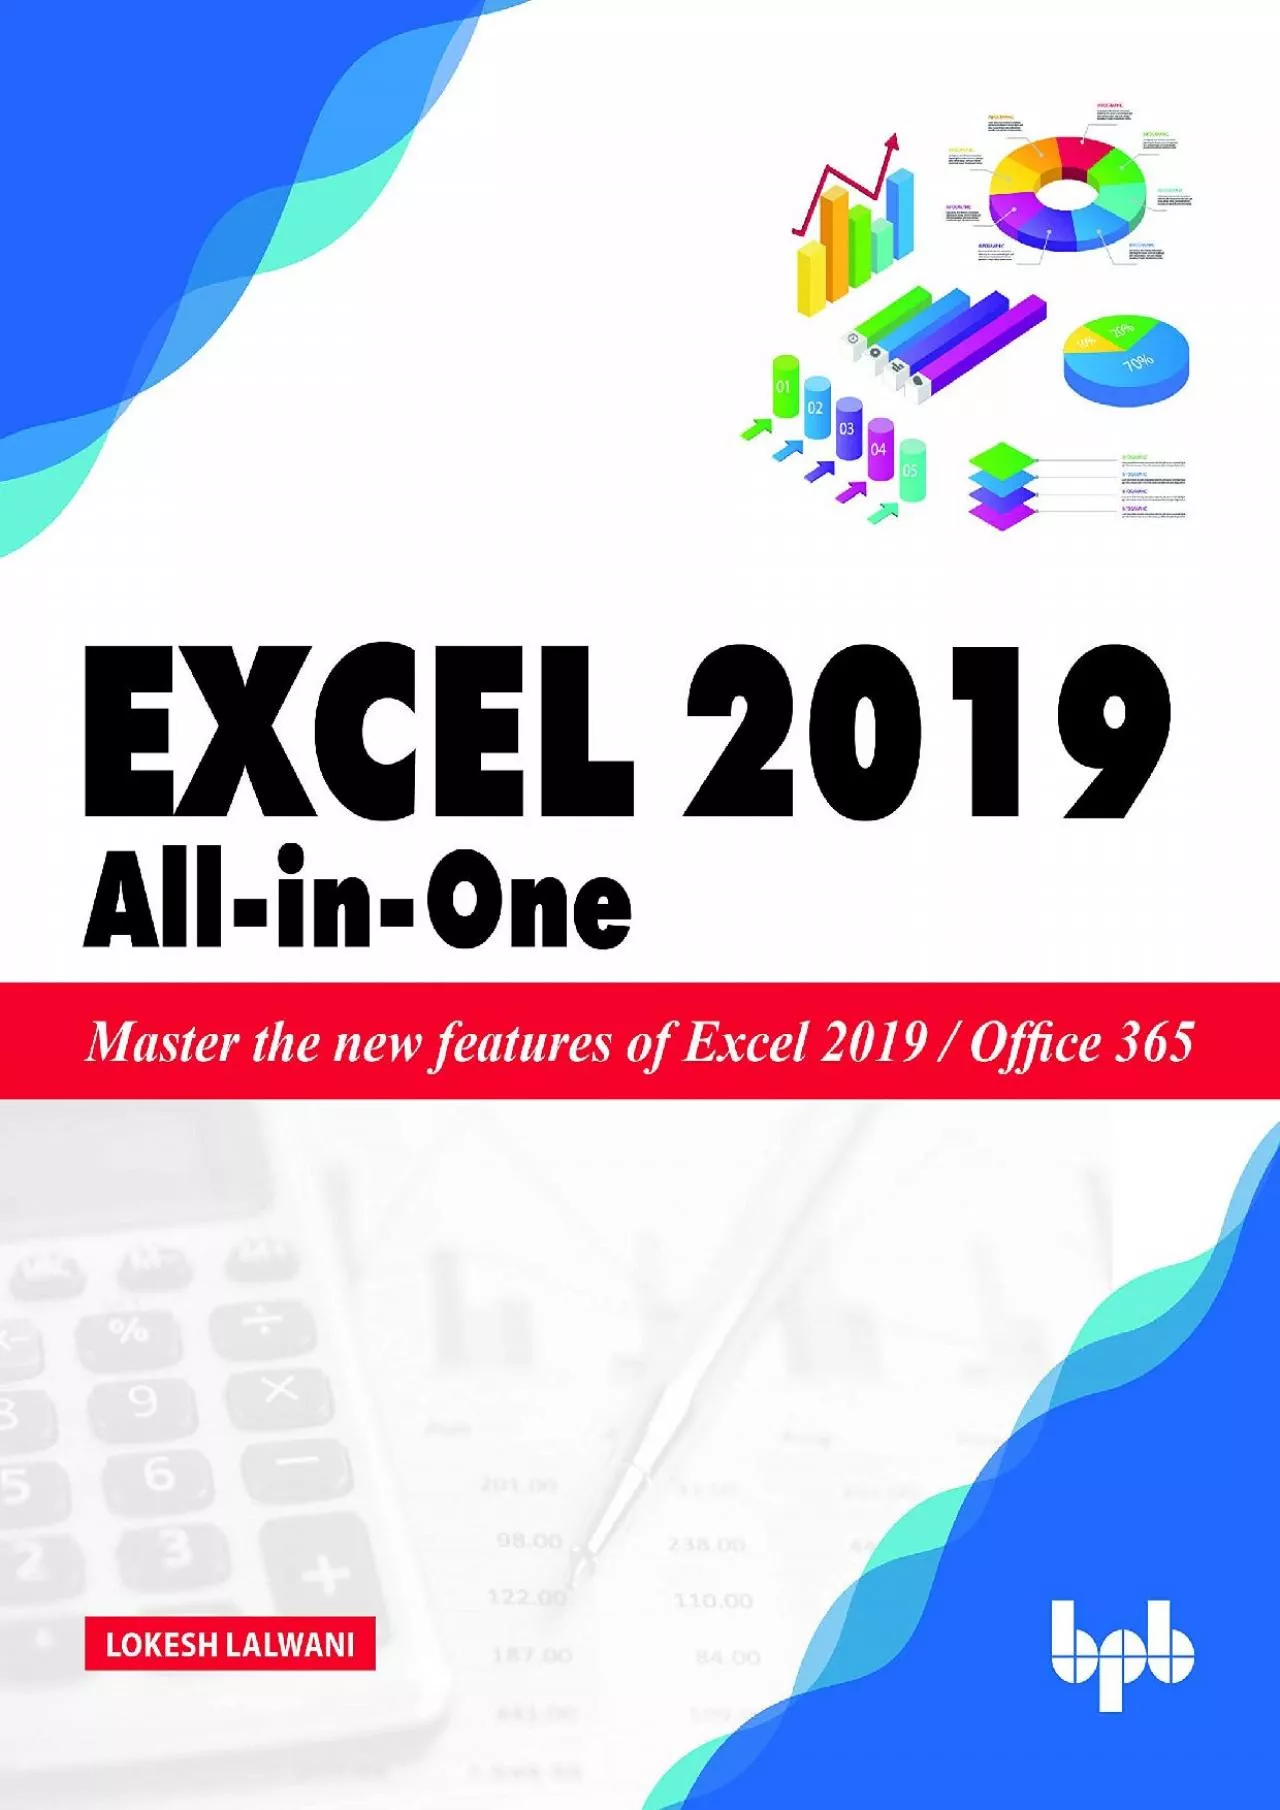 (BOOS)-Excel 2019 All-In-One: Master the new features of Excel 2019 / Office 365 (English